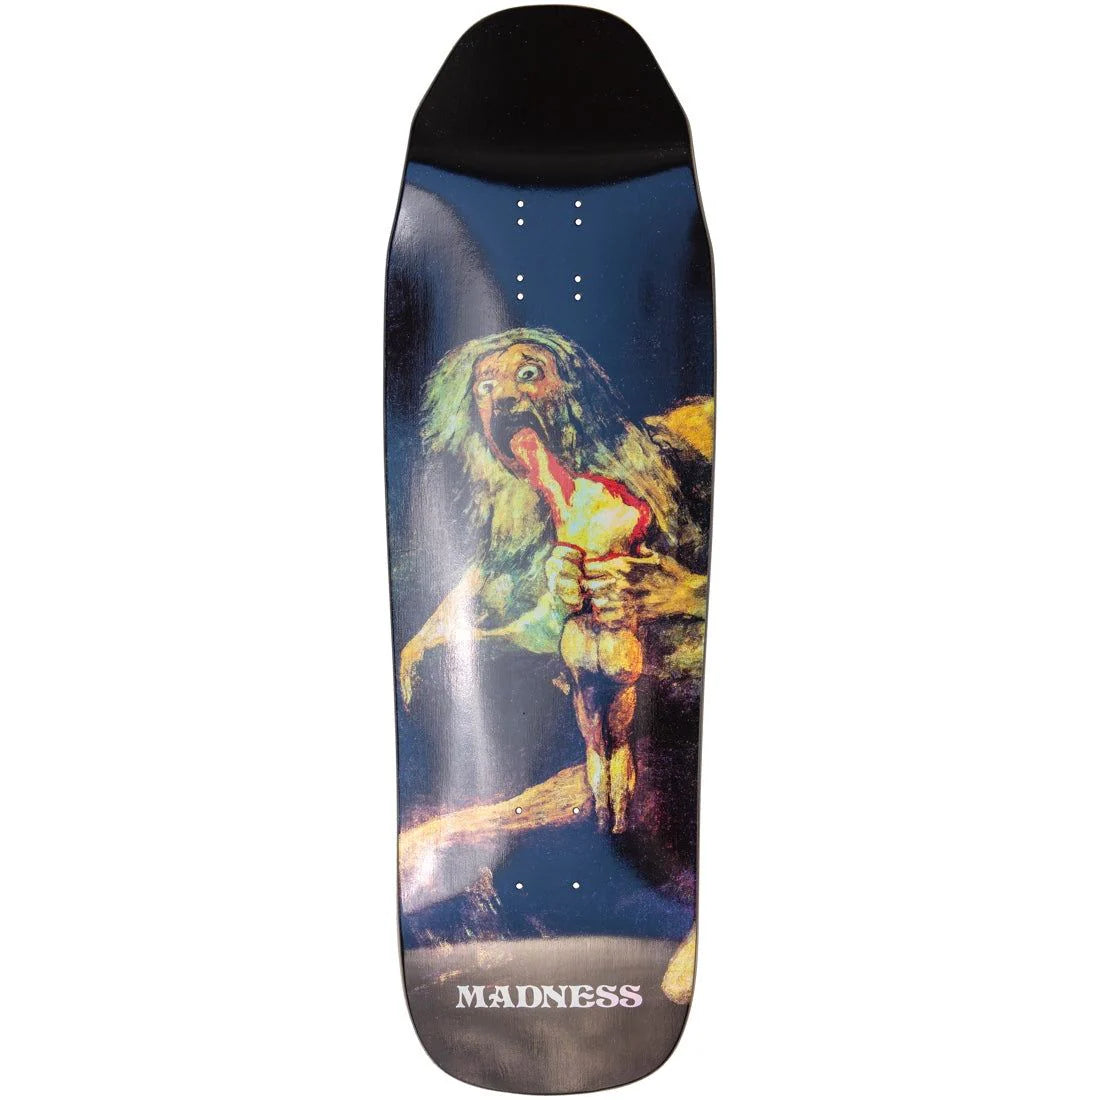 Madness Son Black Holographic Resin 7 9.5" Skateboard Deck